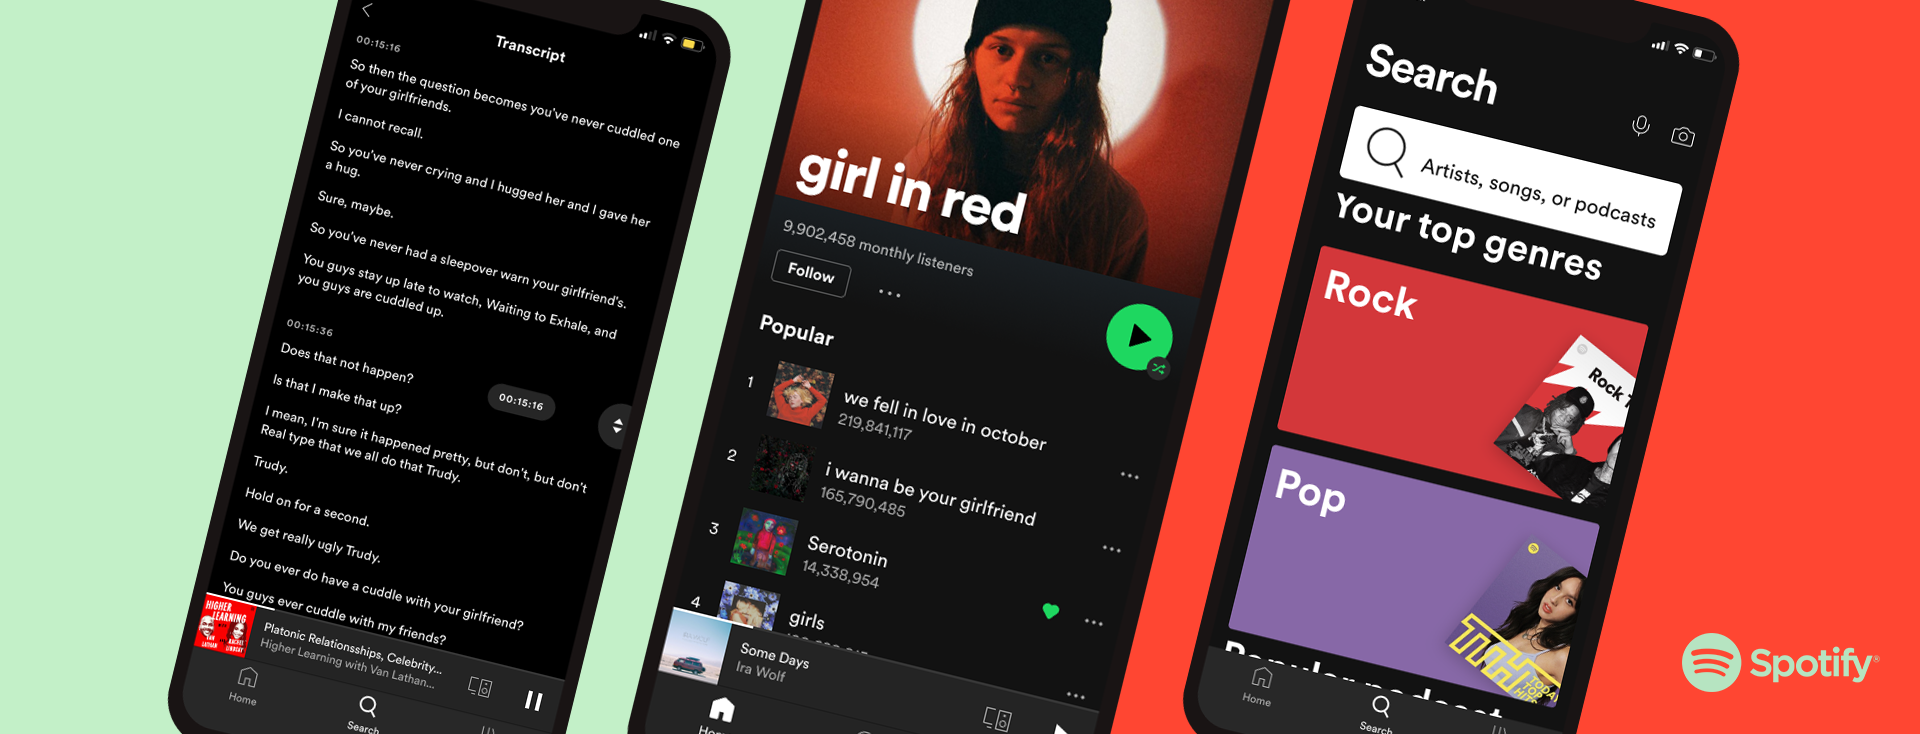 3 Spotify mobile experience updates to help improve accessibility